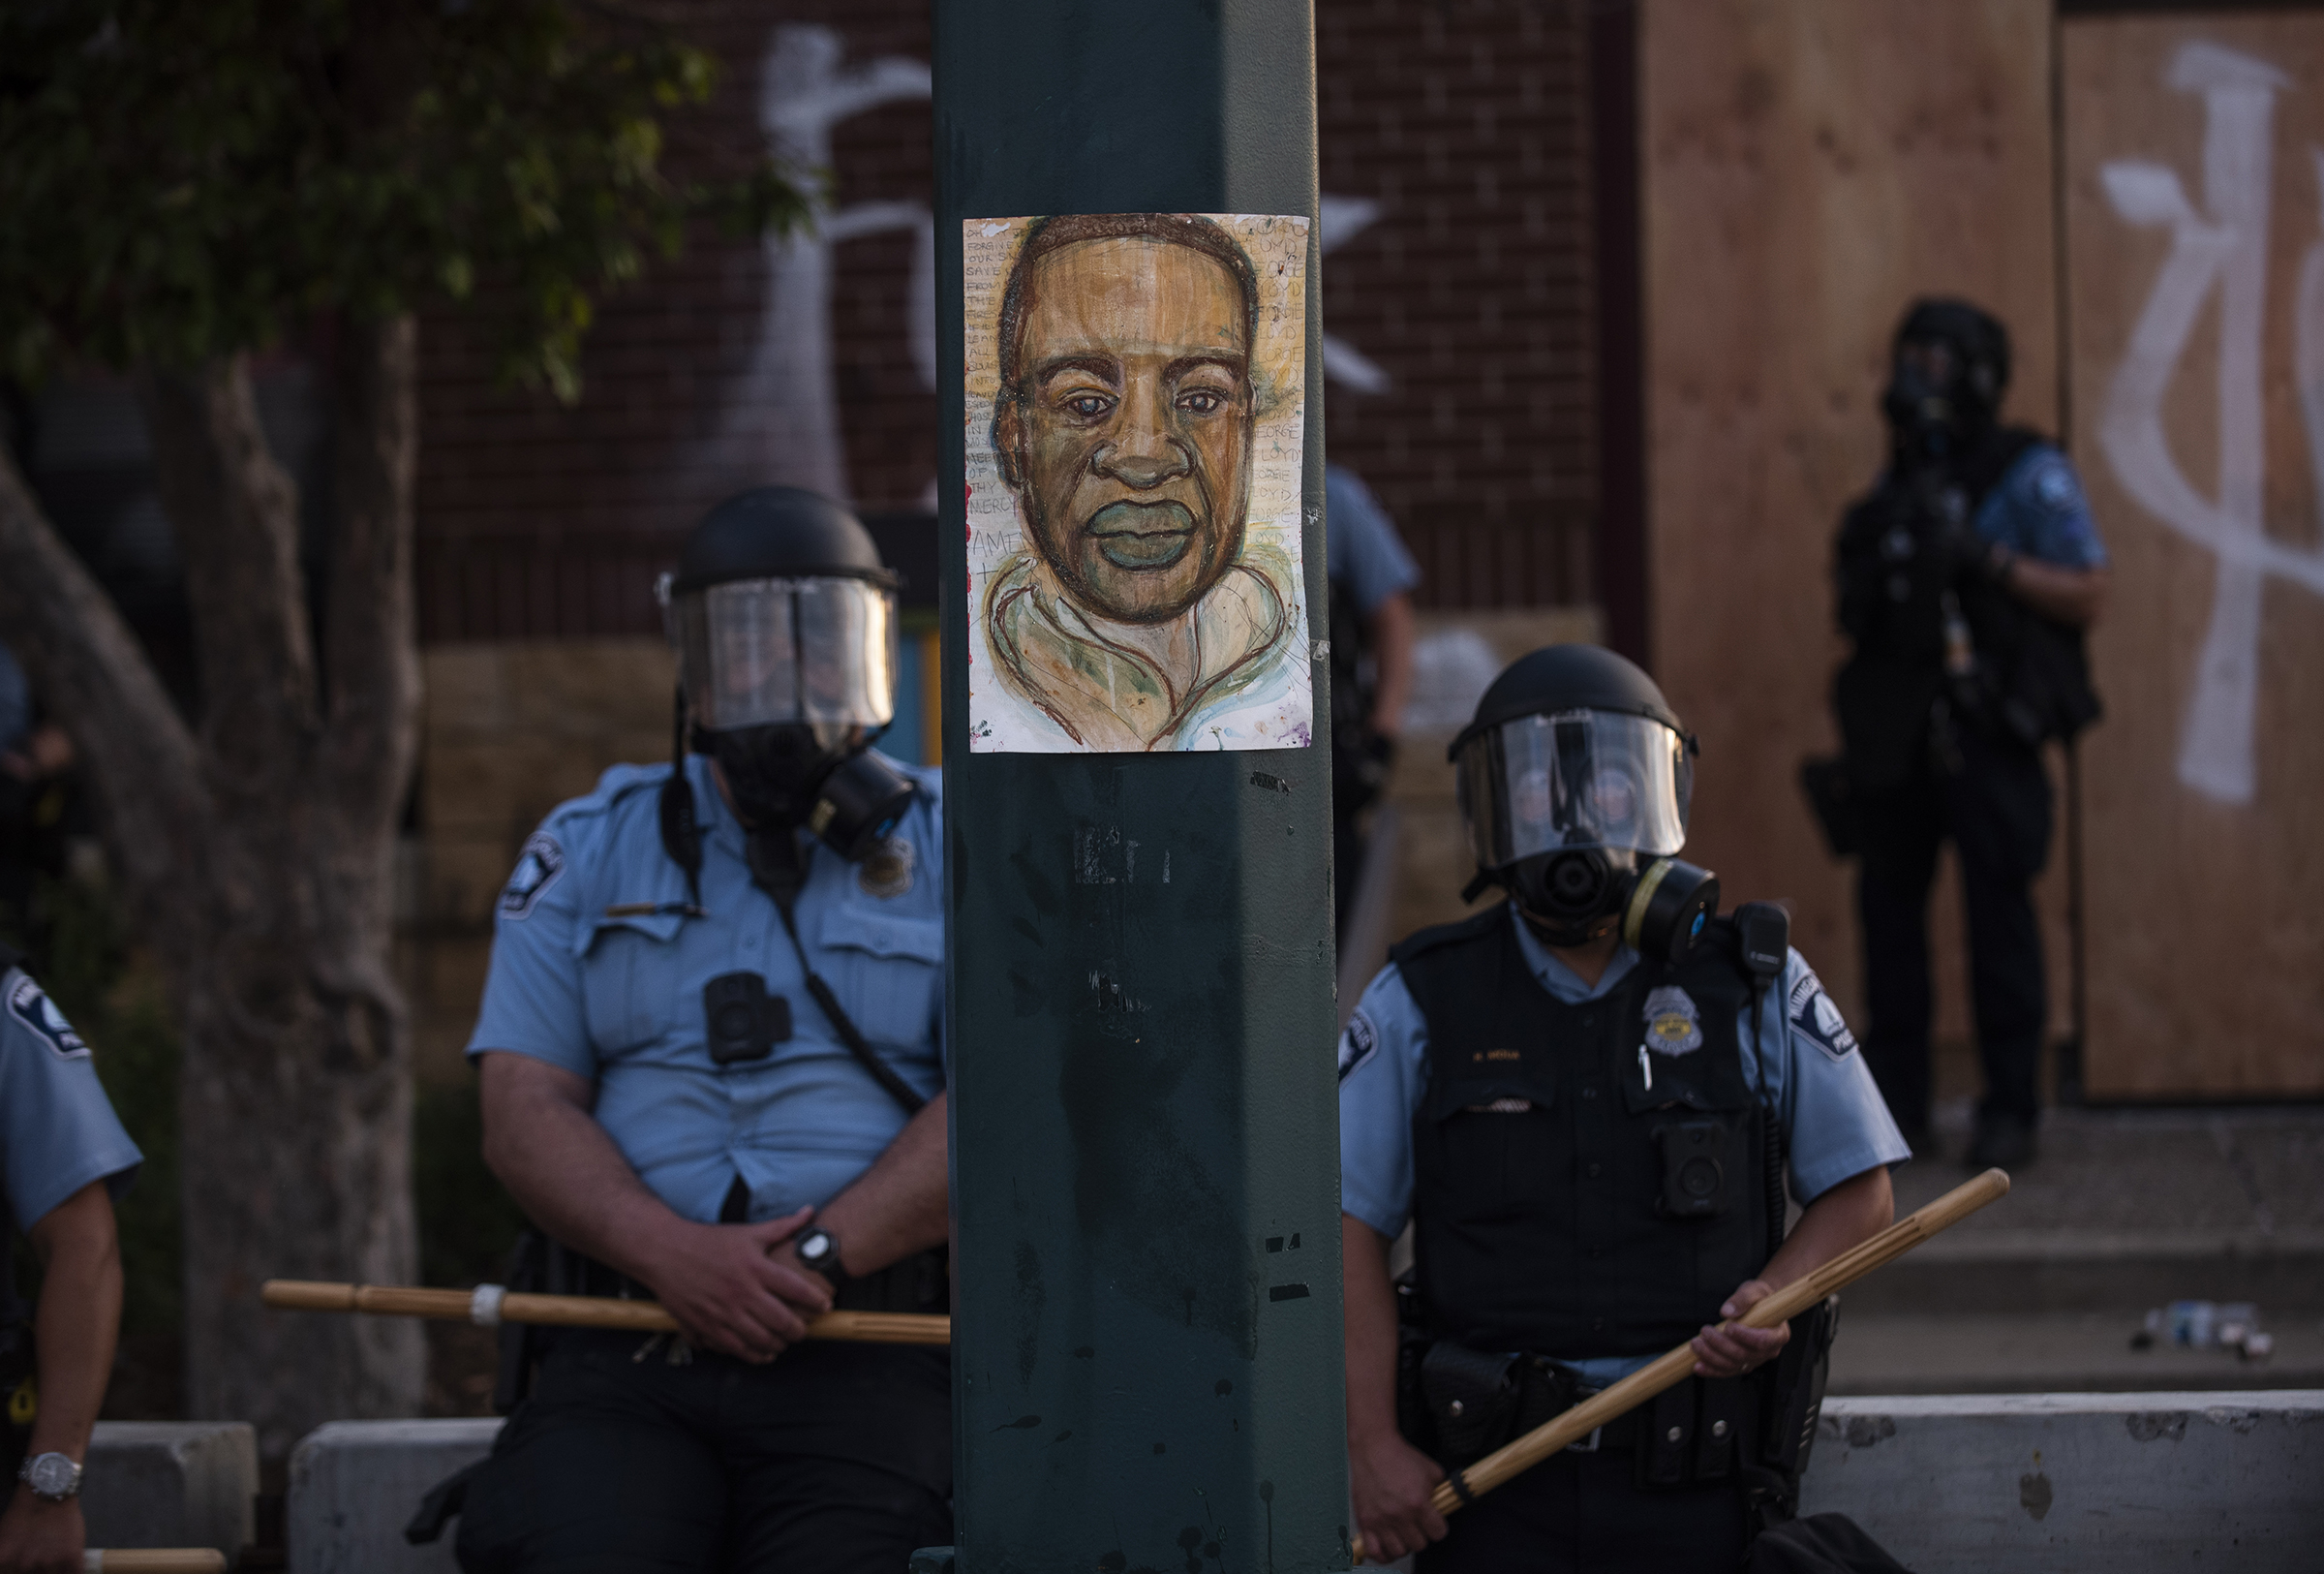 A portrait of George Floyd hangs on a street light pole as police officers stand guard at the 3rd precinct during a face off with protesters on May 27. (Stephen Maturen—Getty Images)